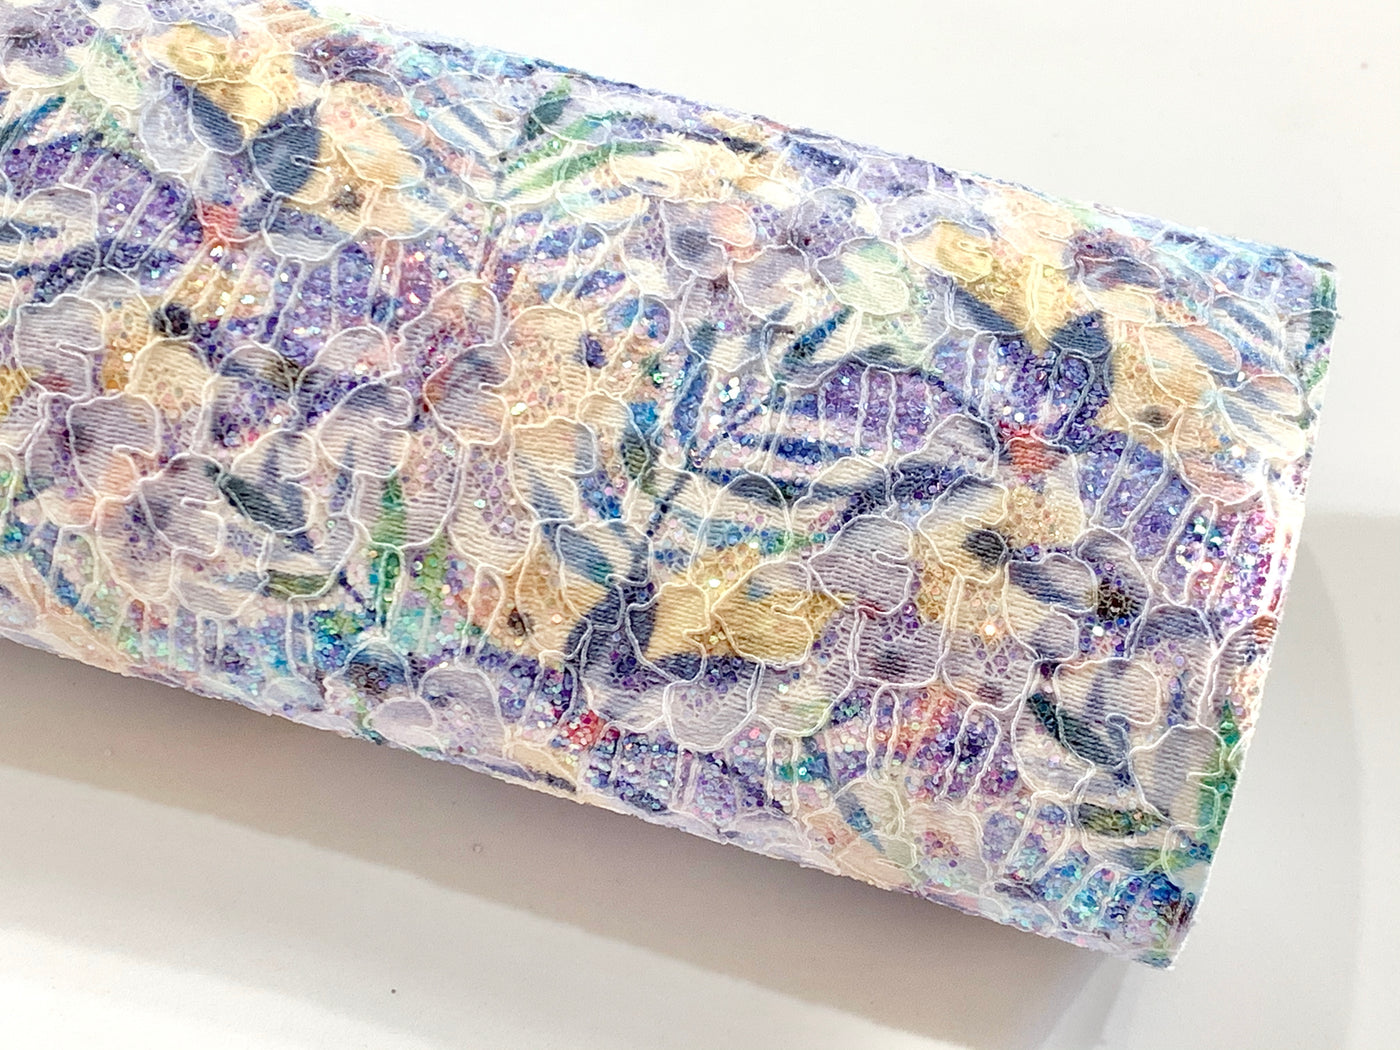 Summer Palm Floral Glitter Lace Fabric Sheet A4 - Glitter Lace Purple and Yellow